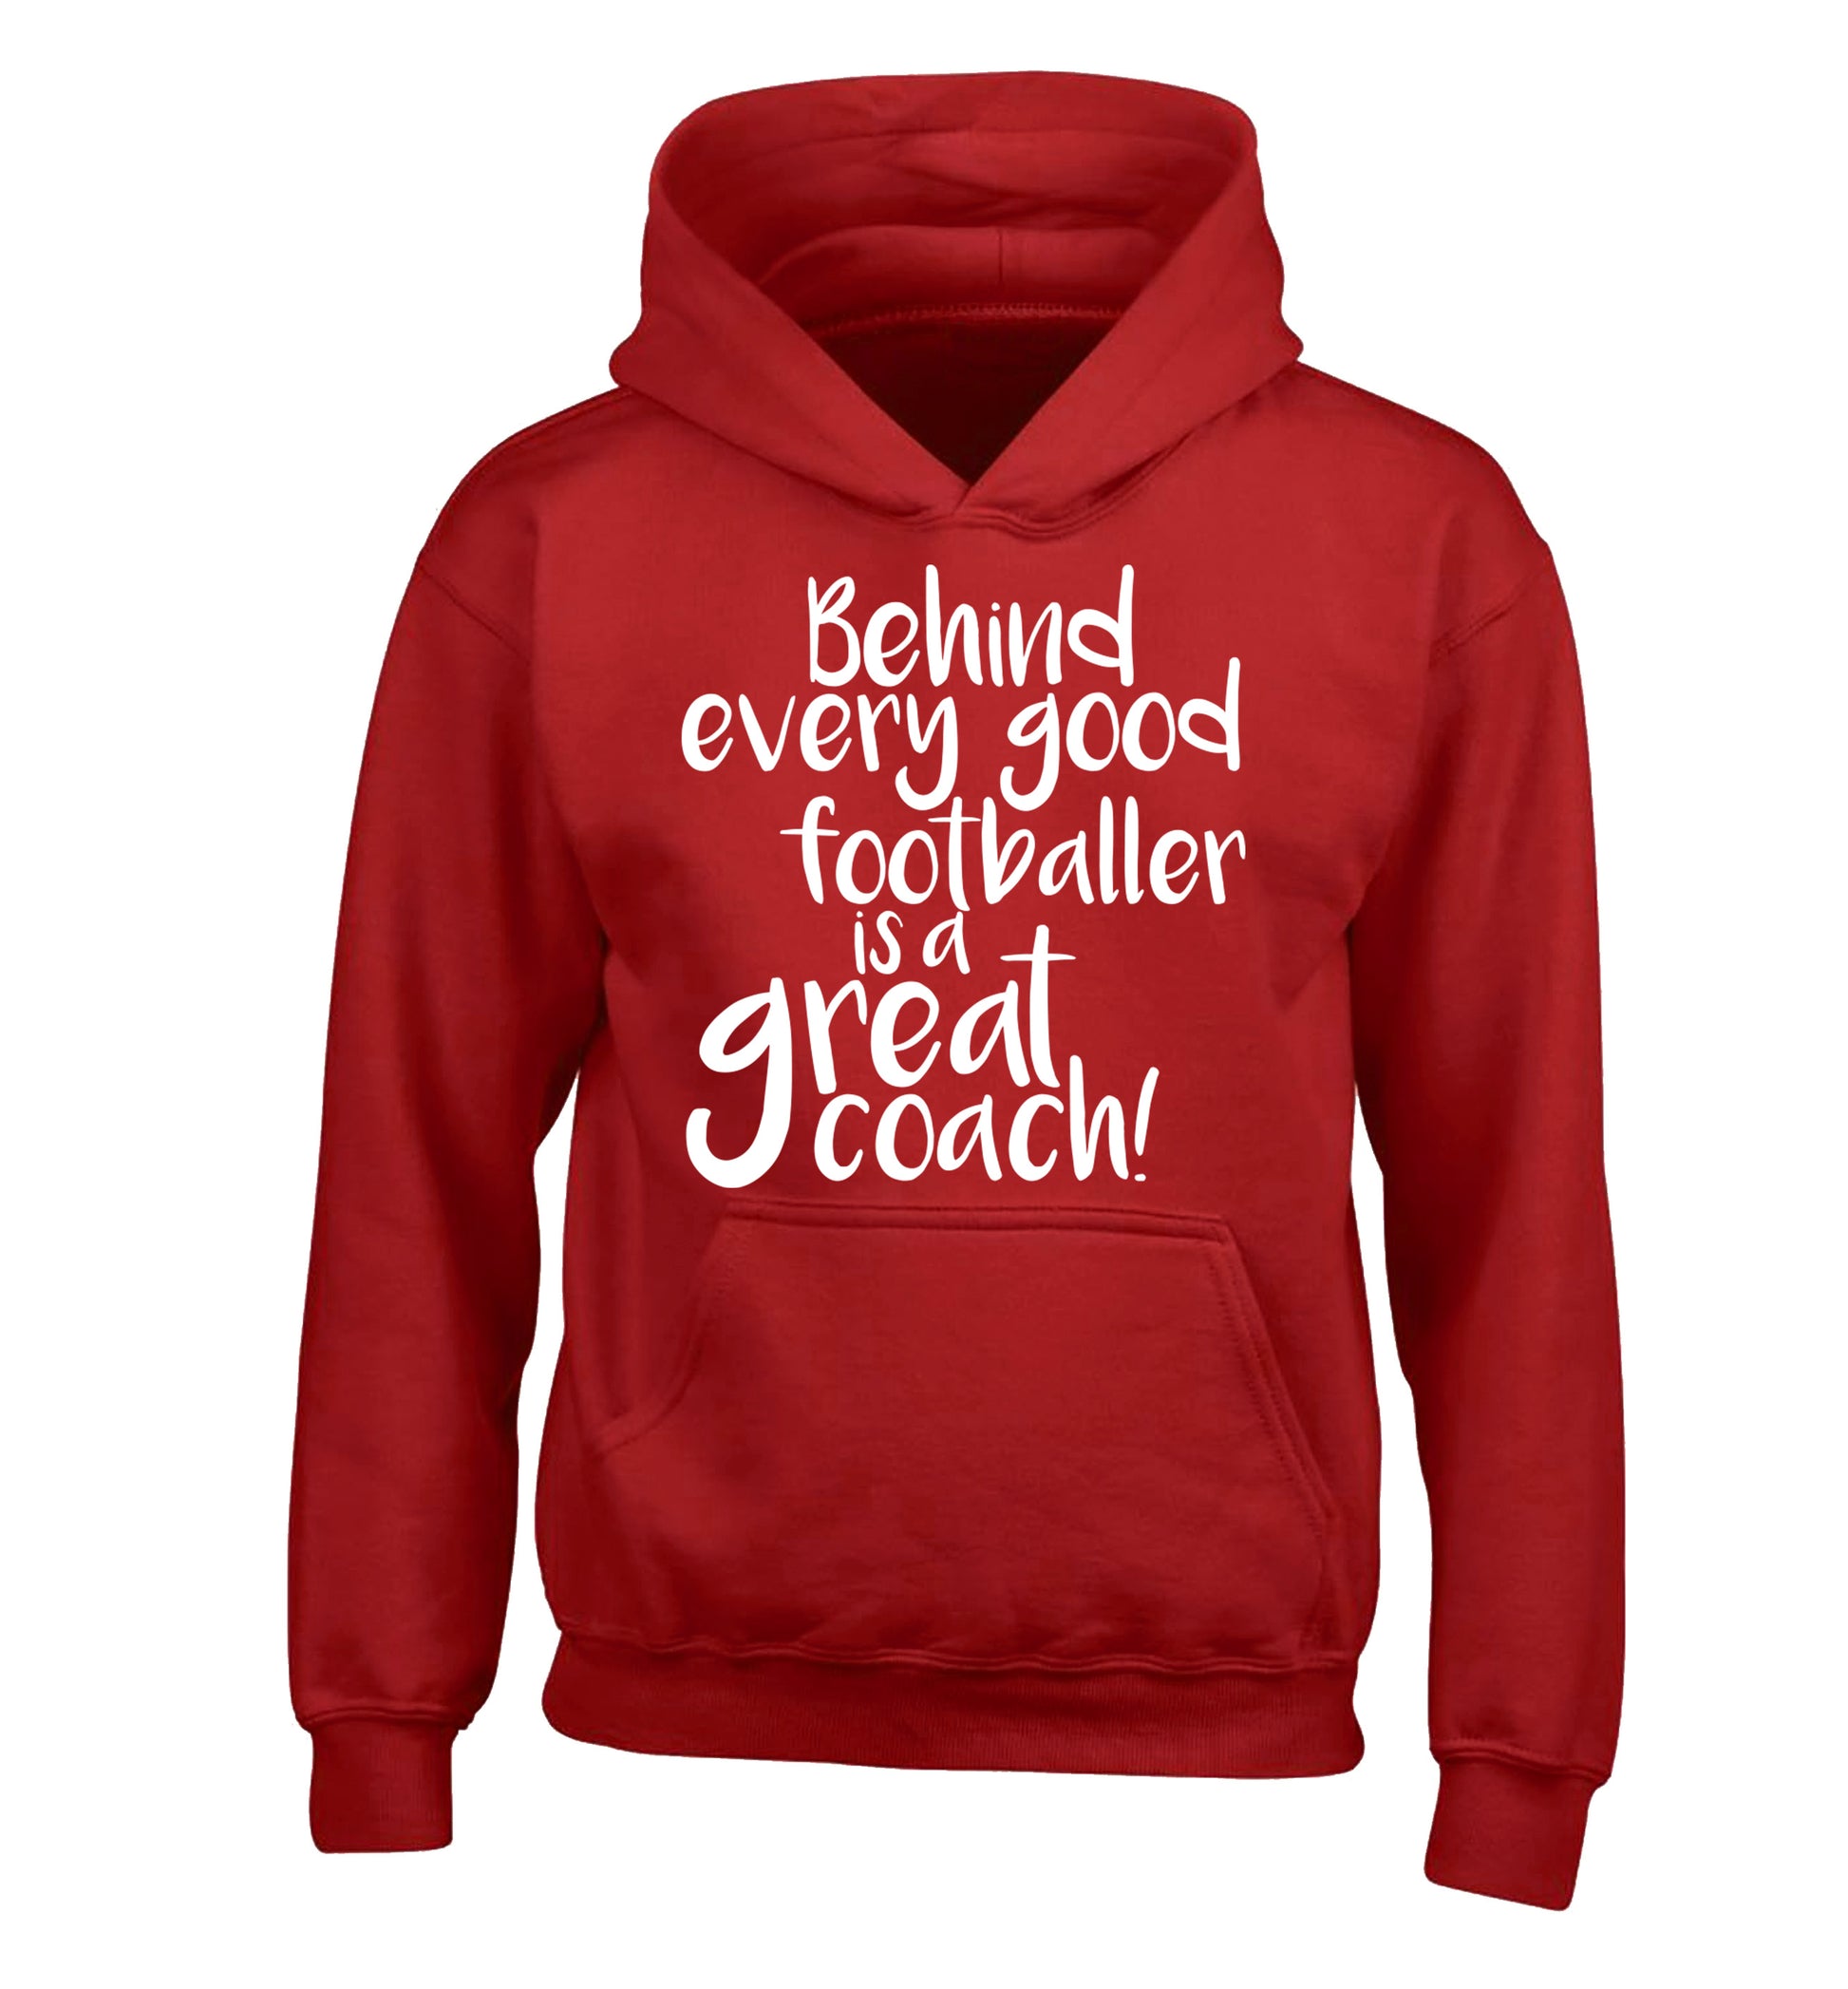 Behind every good footballer is a great coach! children's red hoodie 12-14 Years